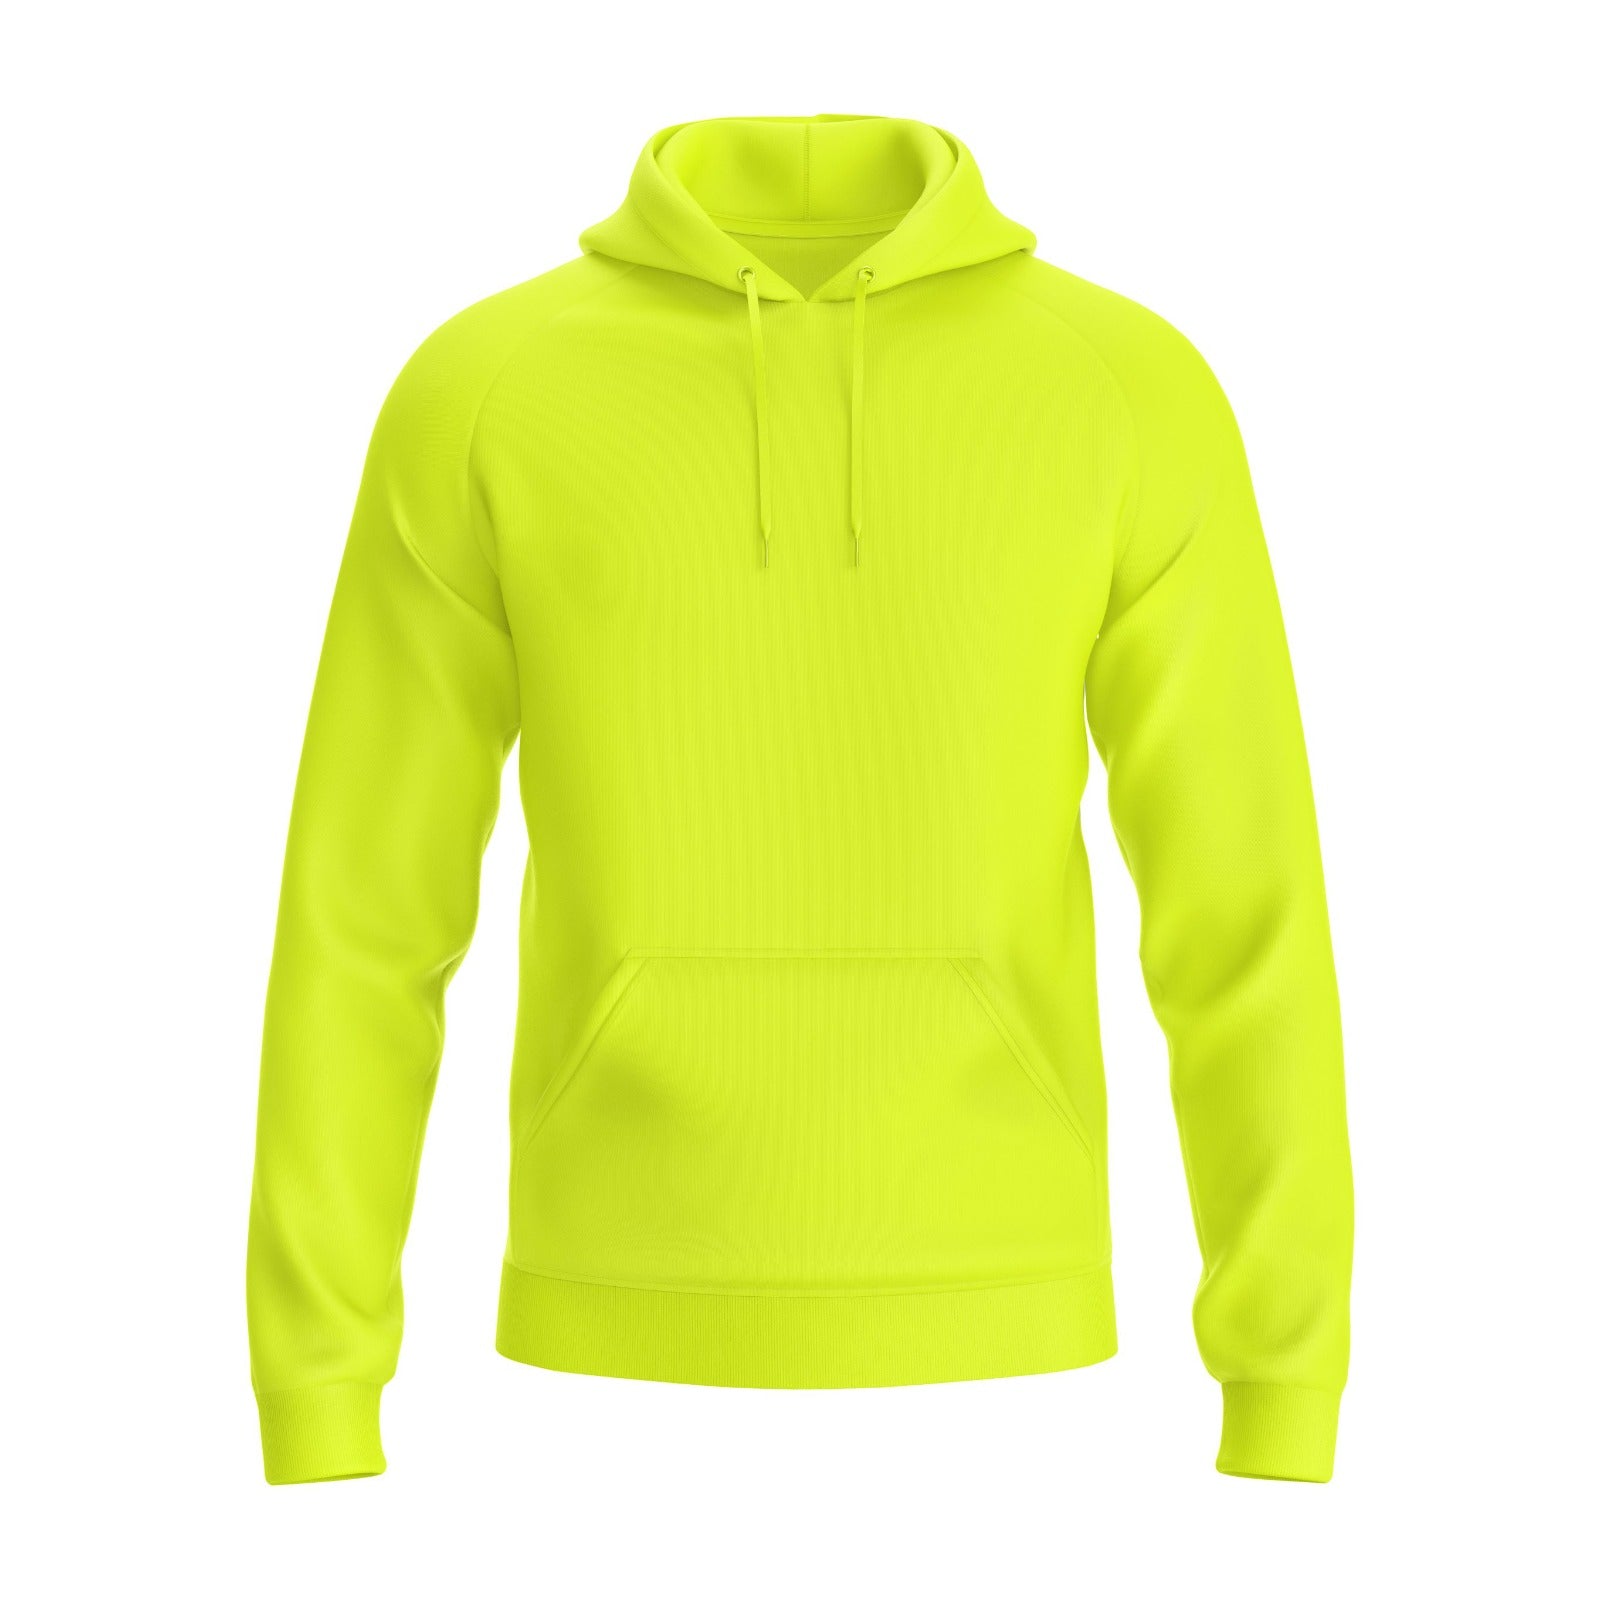 JP High Visibility Safety Long Sleeve Hoodie Sun Protection Construction Work Hoodies